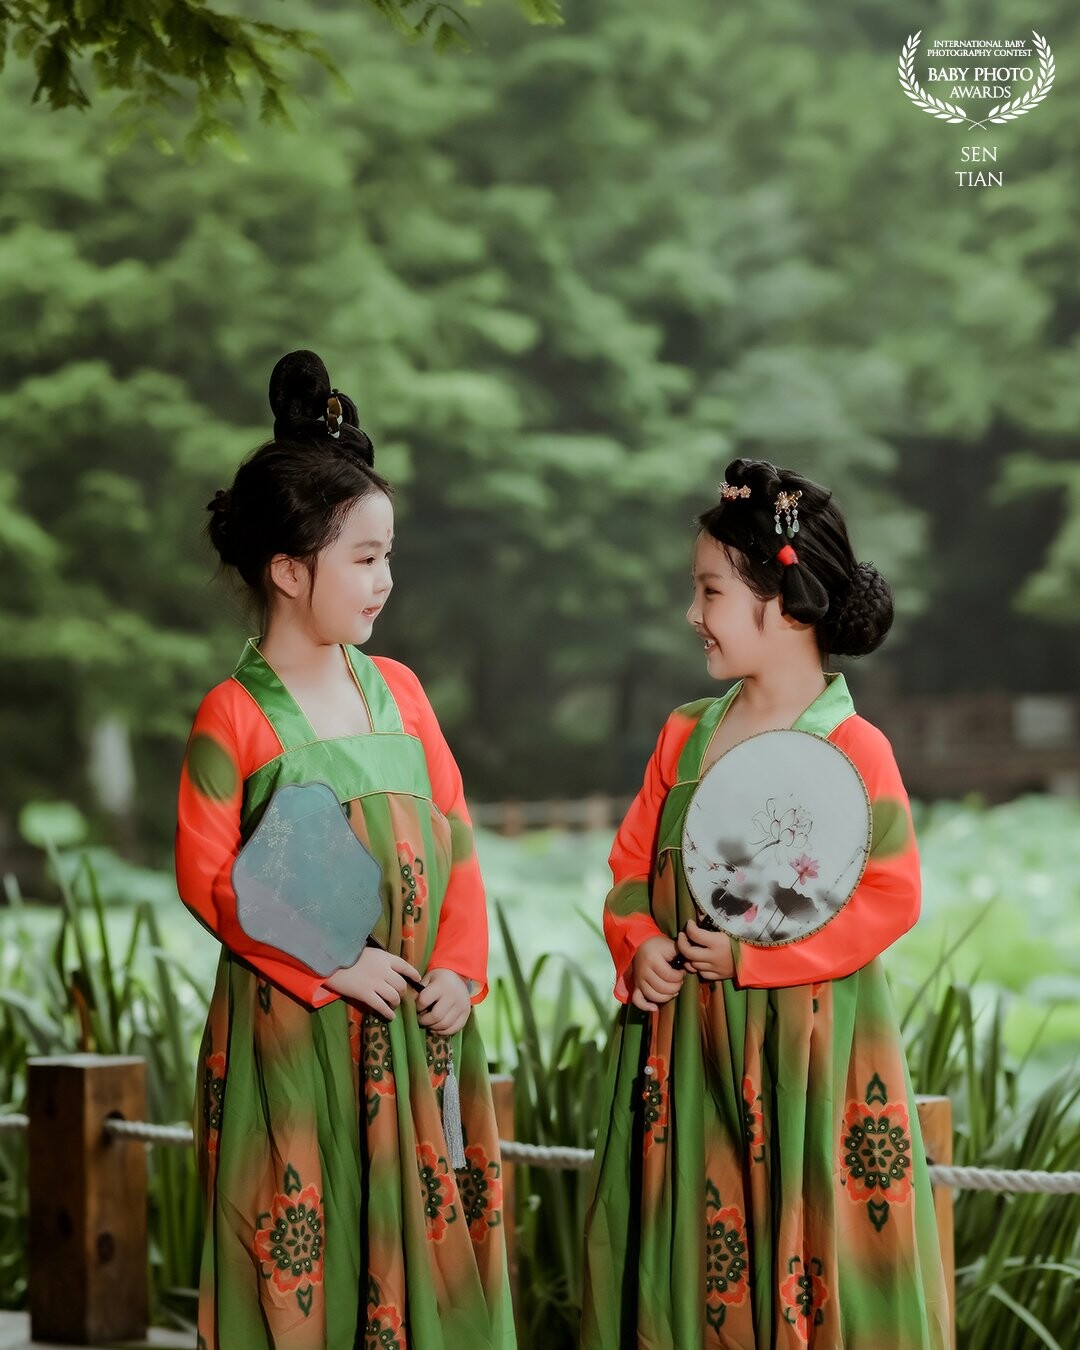 "Tang Dynasty beauties", the two little sisters came out to take photos today. Their mother made up for them at home. This set of modeling is very amazing and a perfect copy of traditional culture. I am honored to record their happy day!